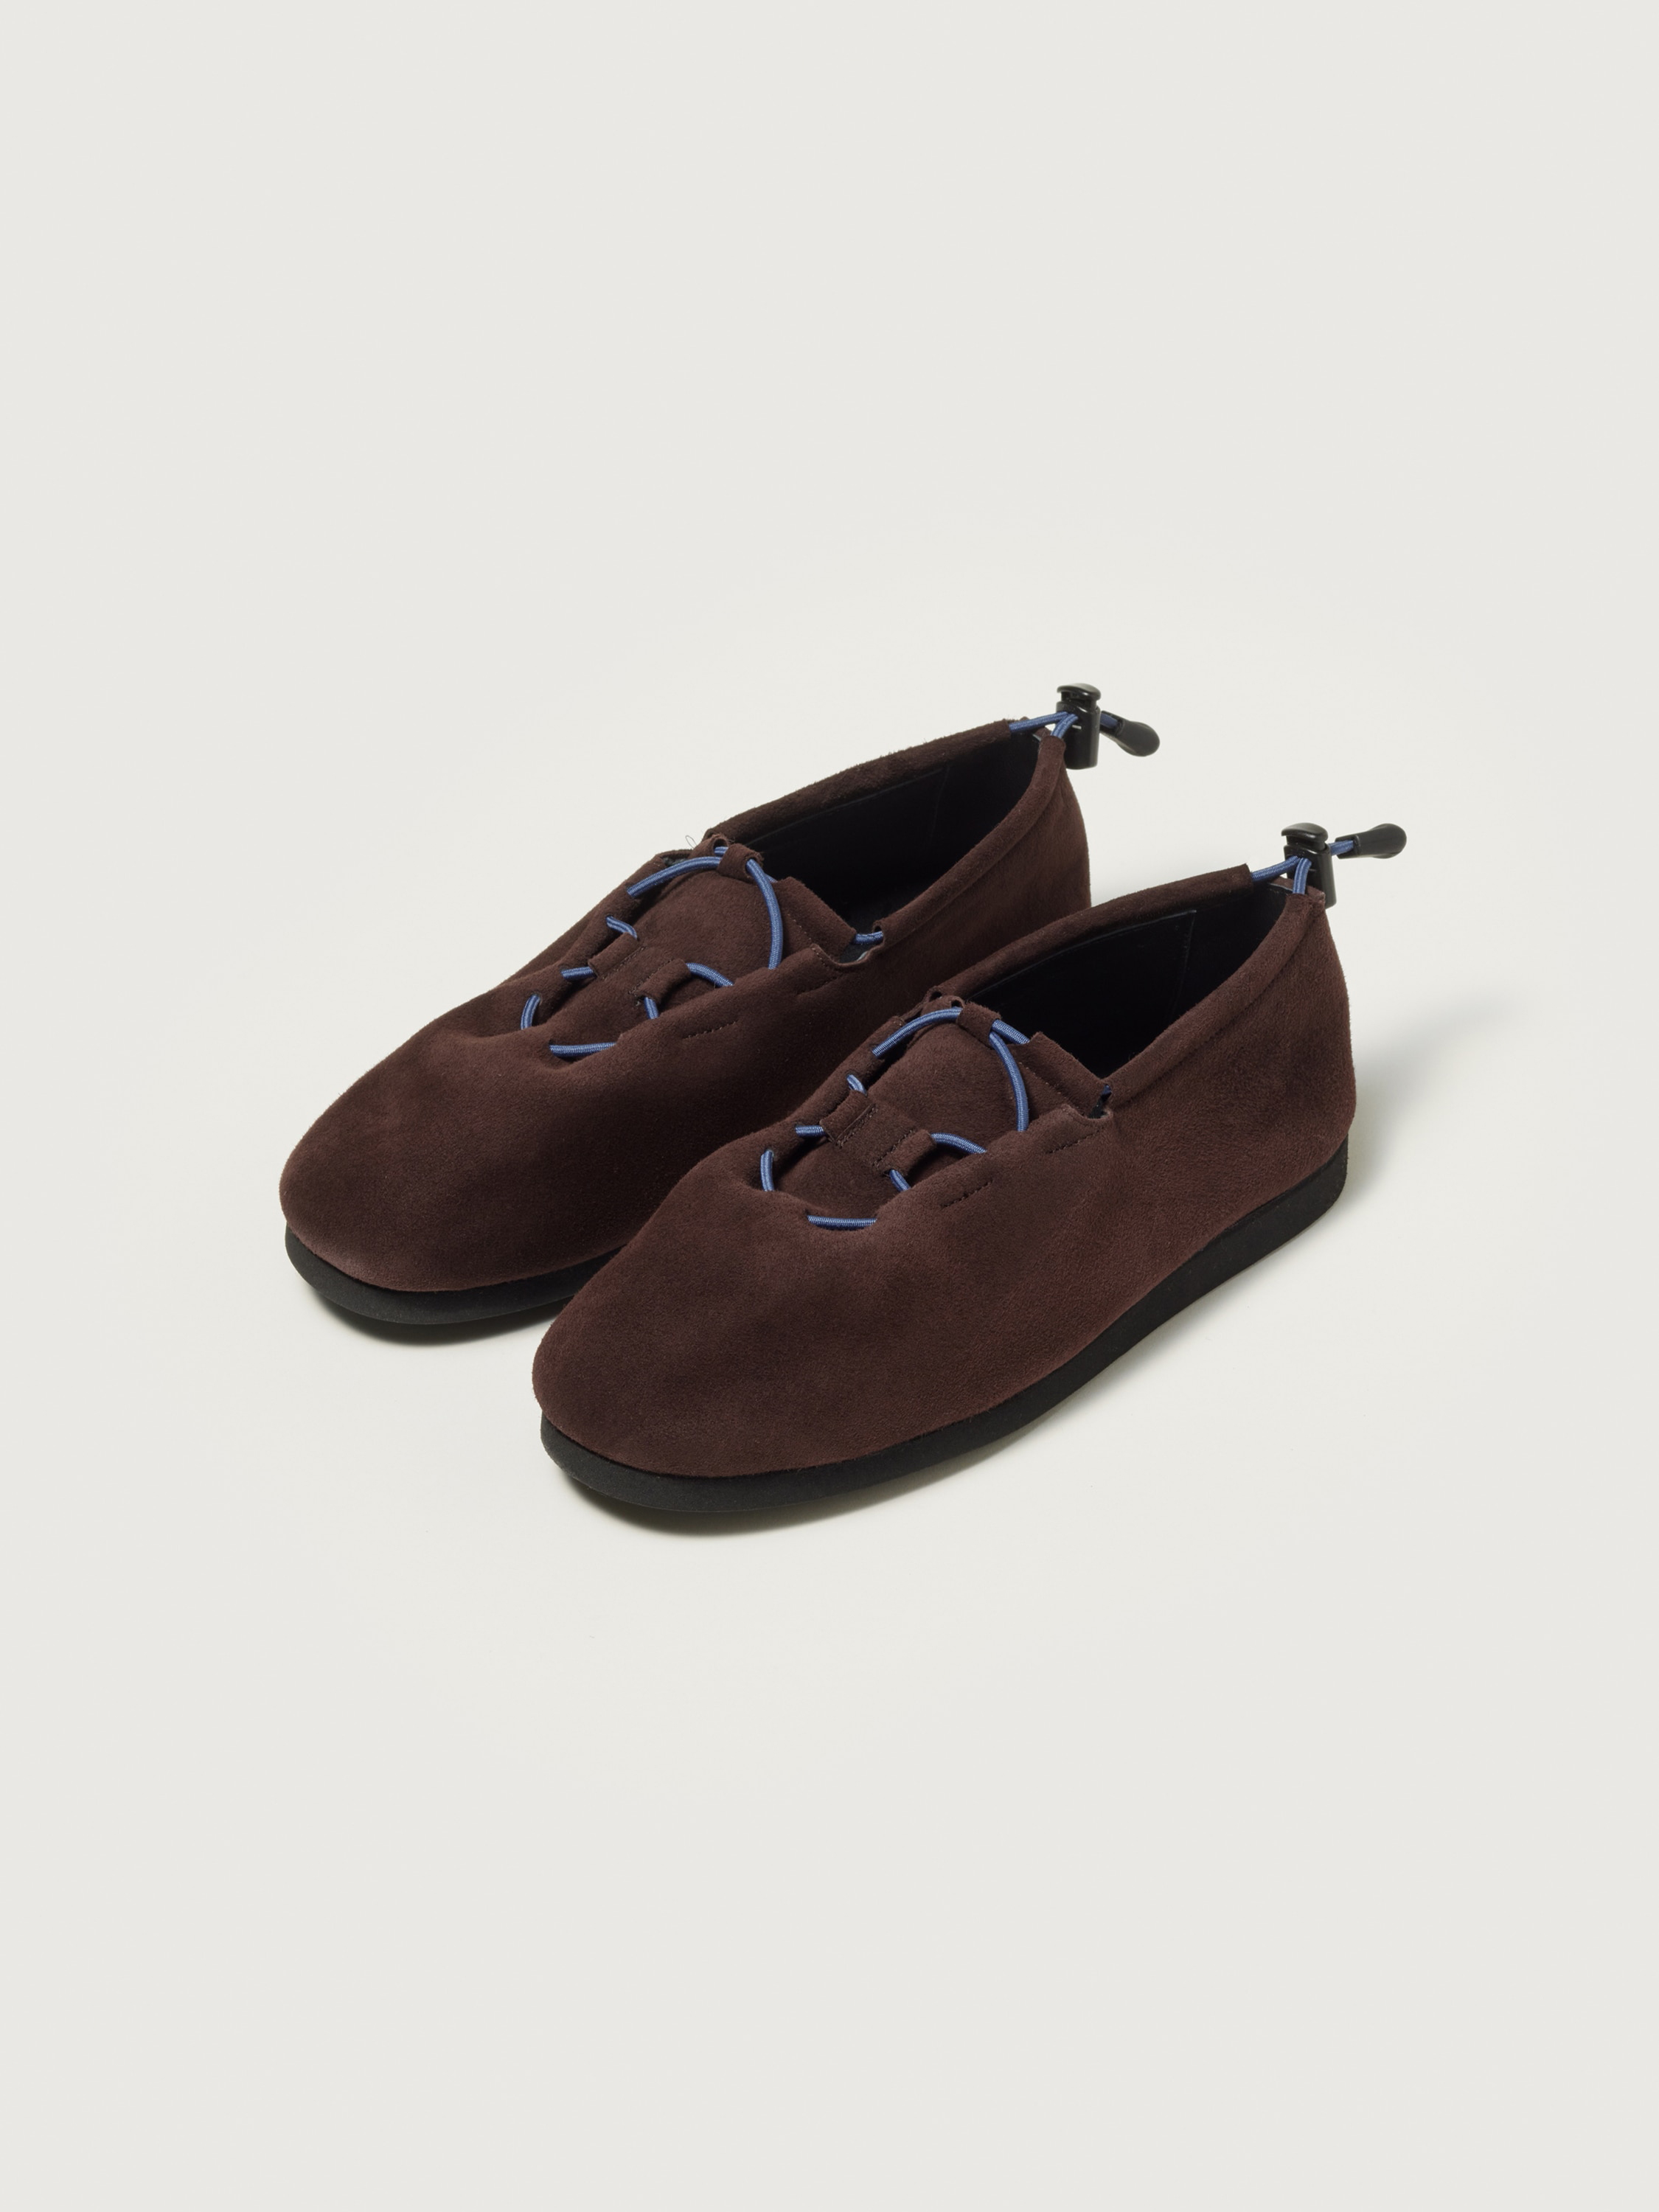 LAMB SUEDE CORD SHOES MADE BY FOOT THE COACHER 詳細画像 DARK BROWN 3